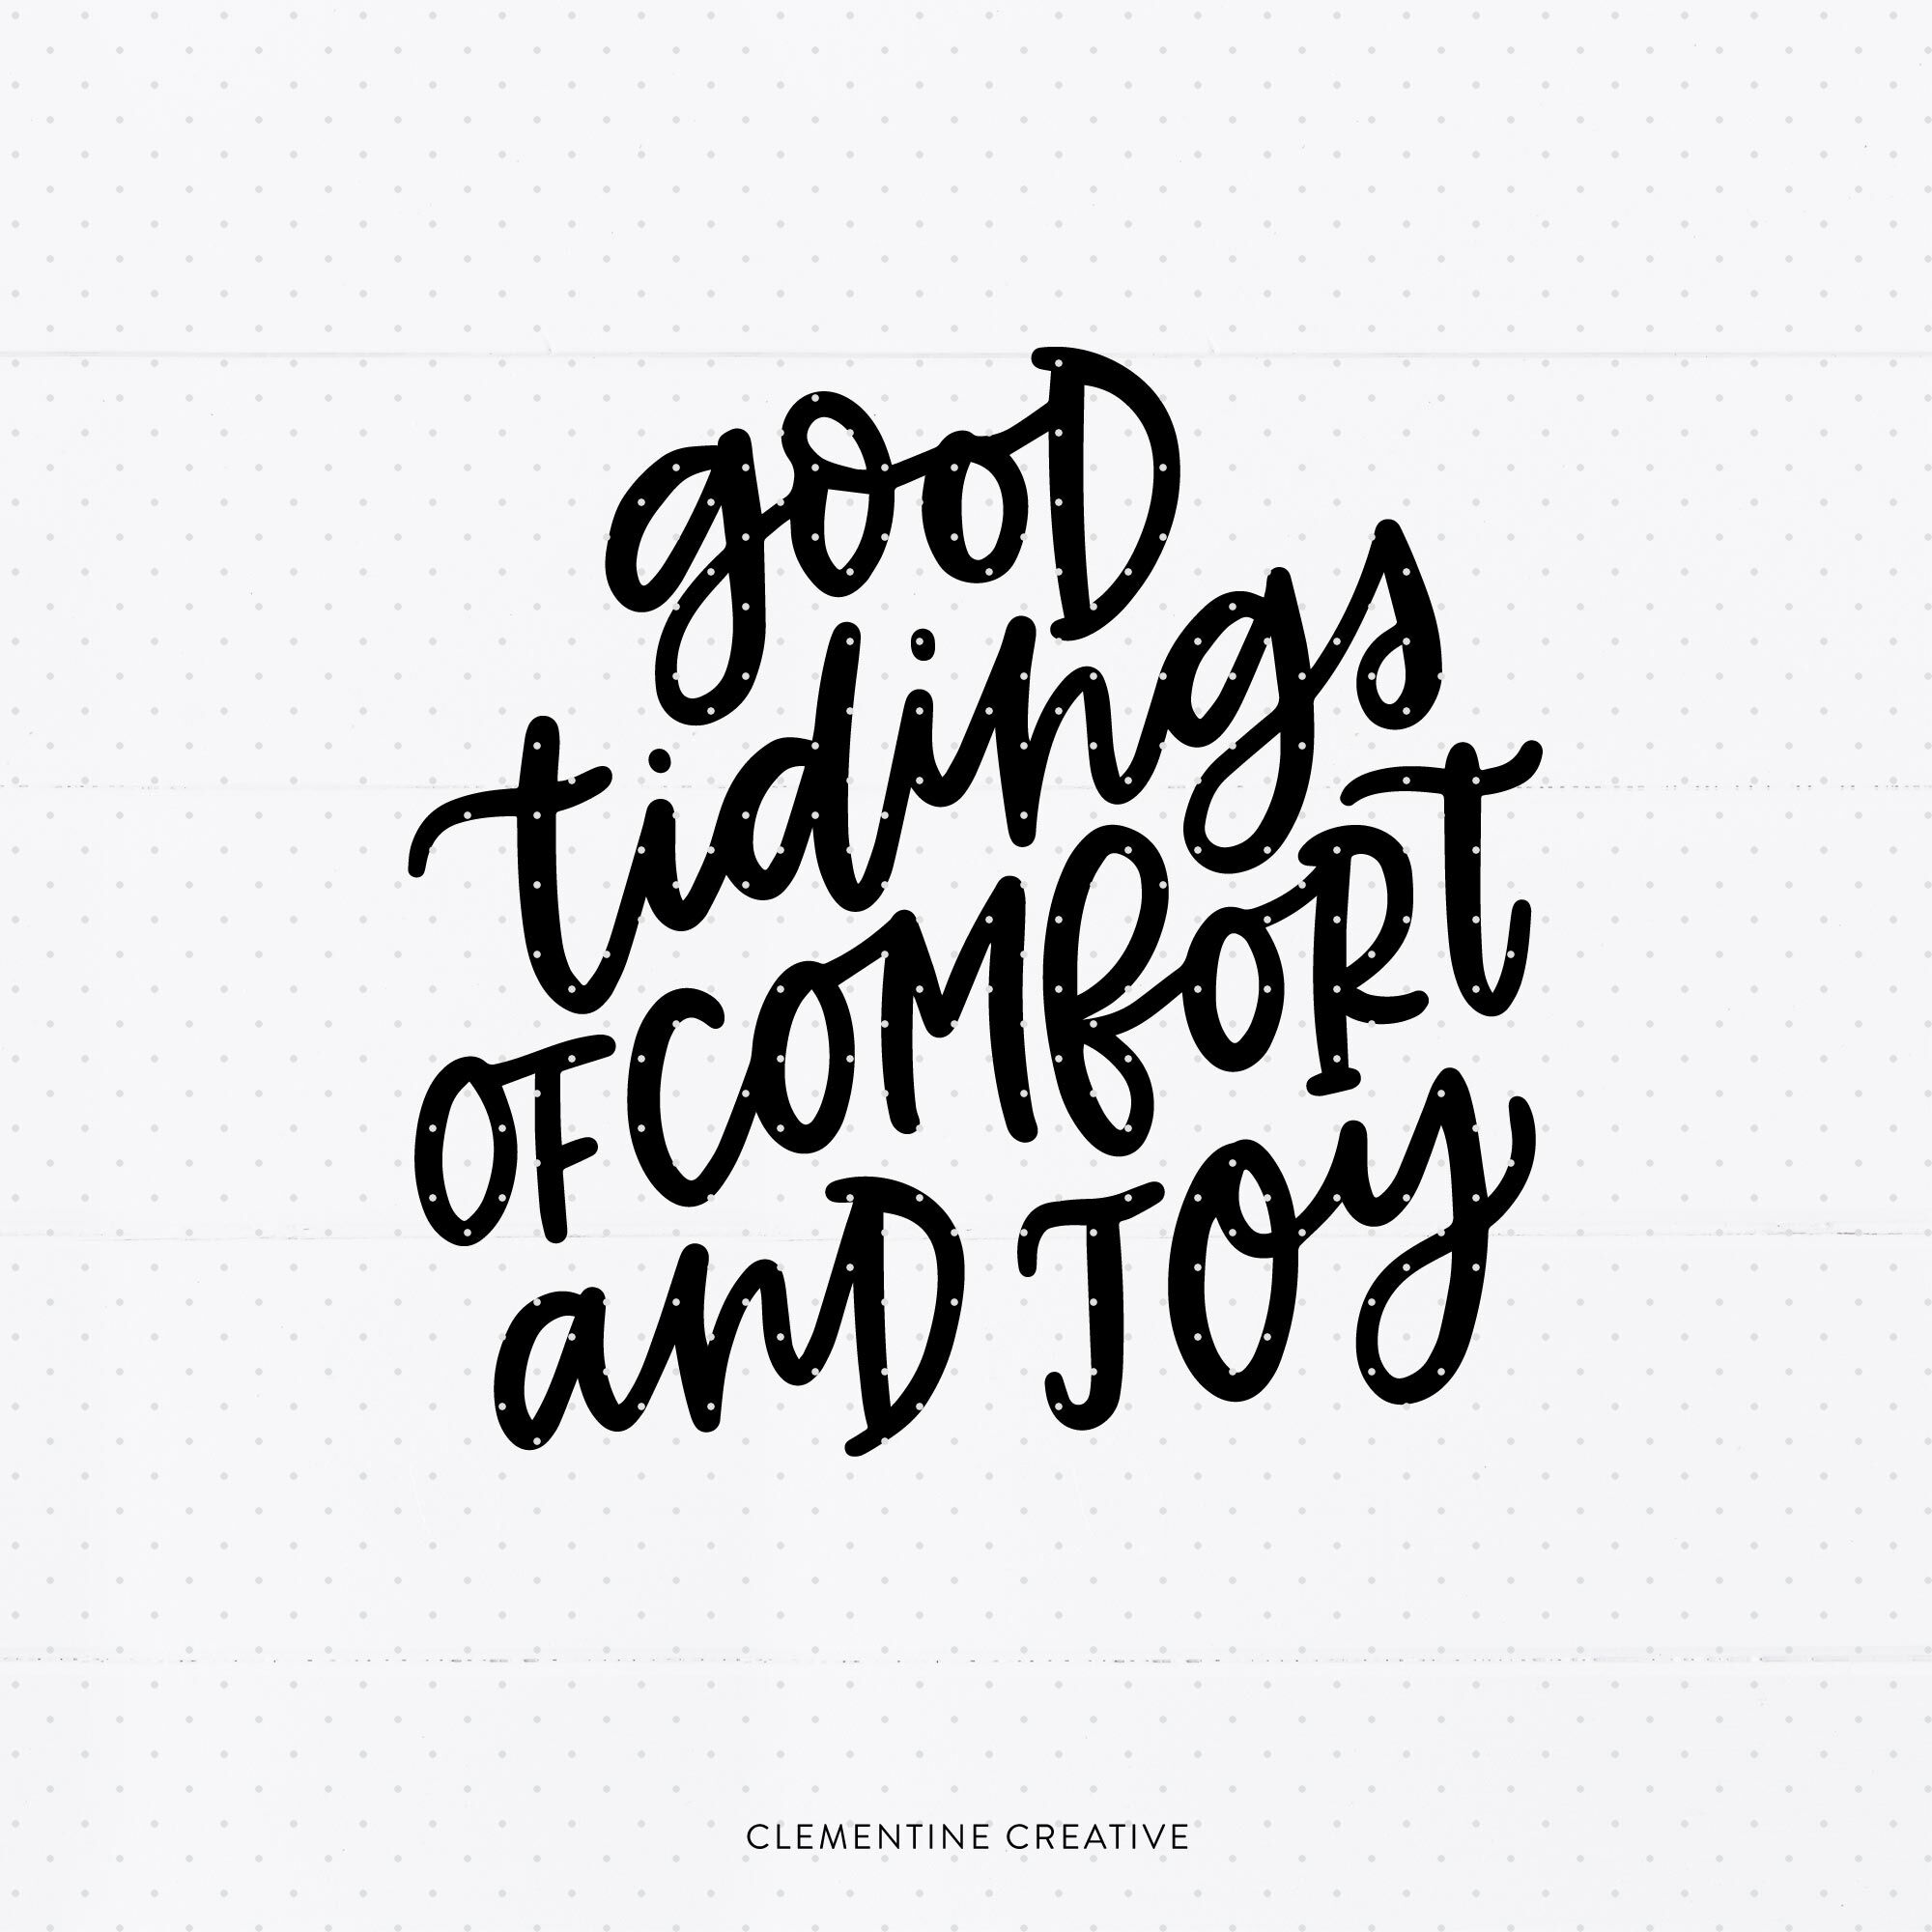 Download Christmas Quote Svg Design Comfort And Joy Svg Christmas Saying Sv By Clementine Creative Thehungryjpeg Com